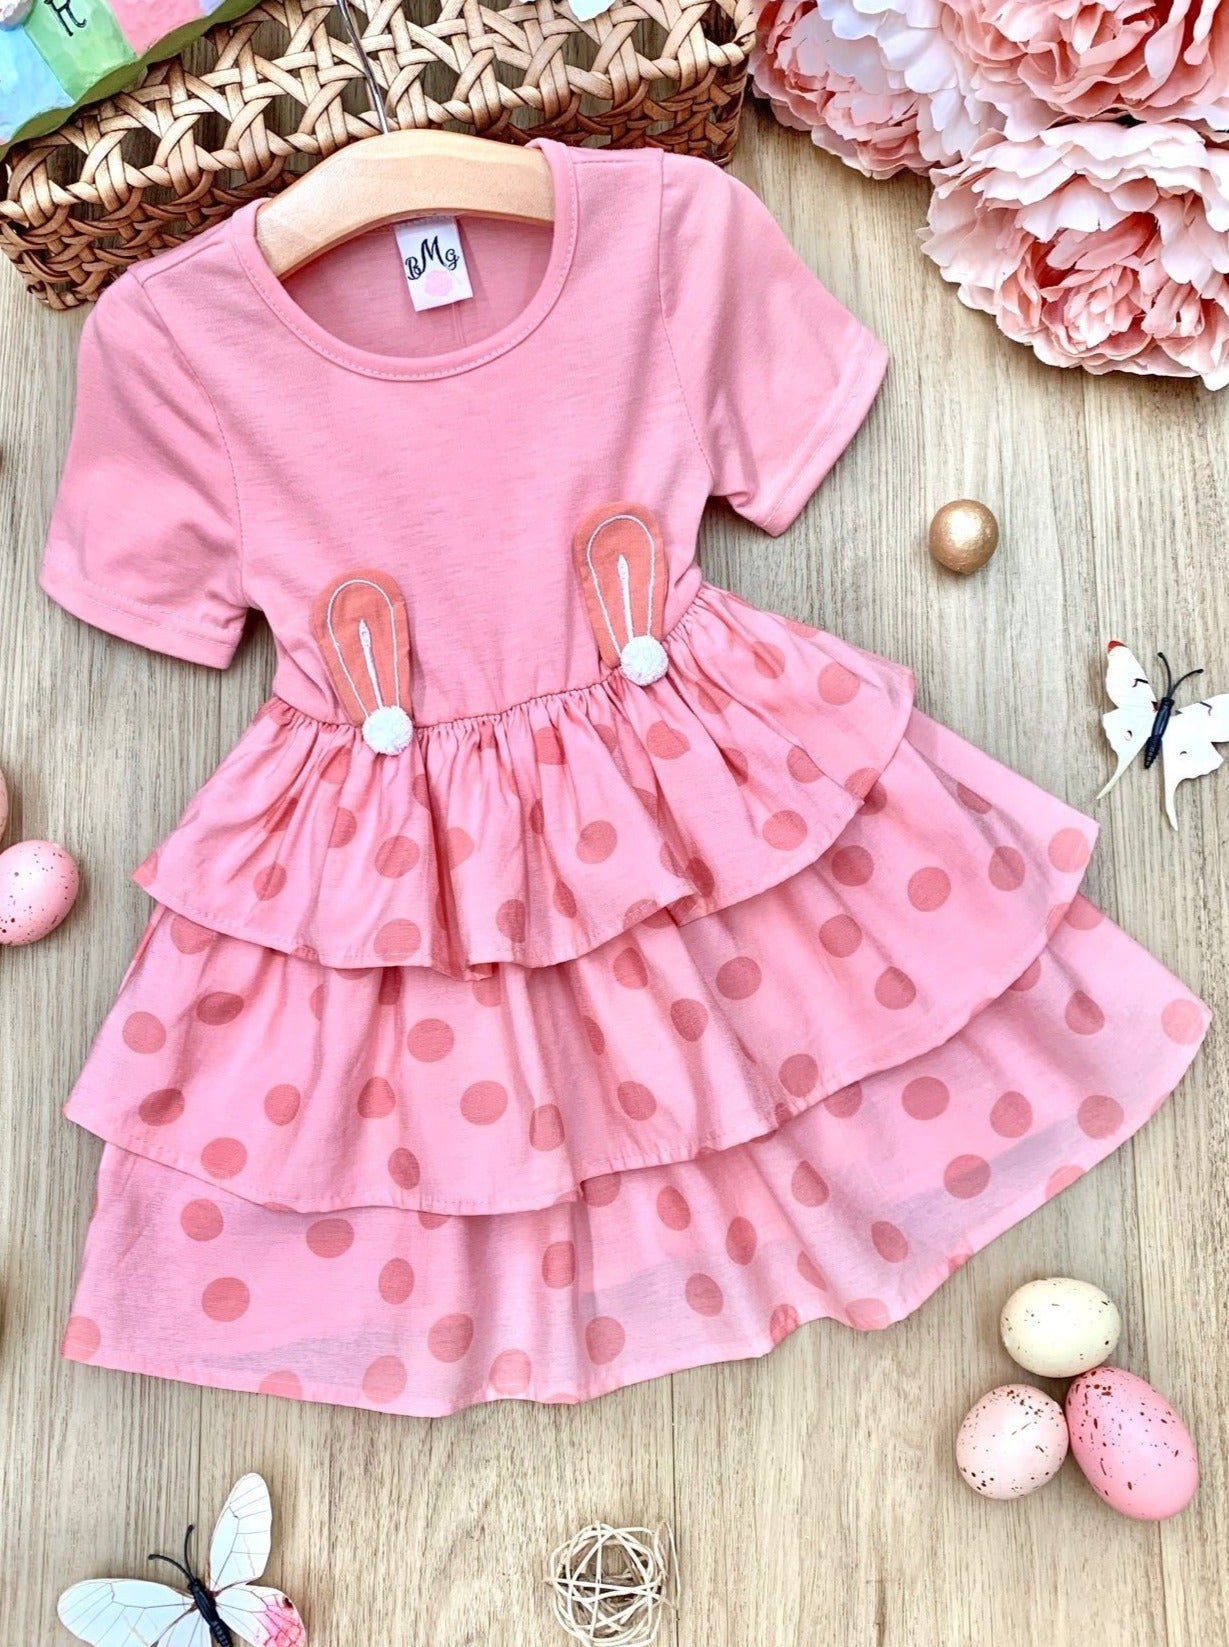 Mia Belle Girls Easter Dresses | Dotted Bunny Ears Tiered Ruffle Dress